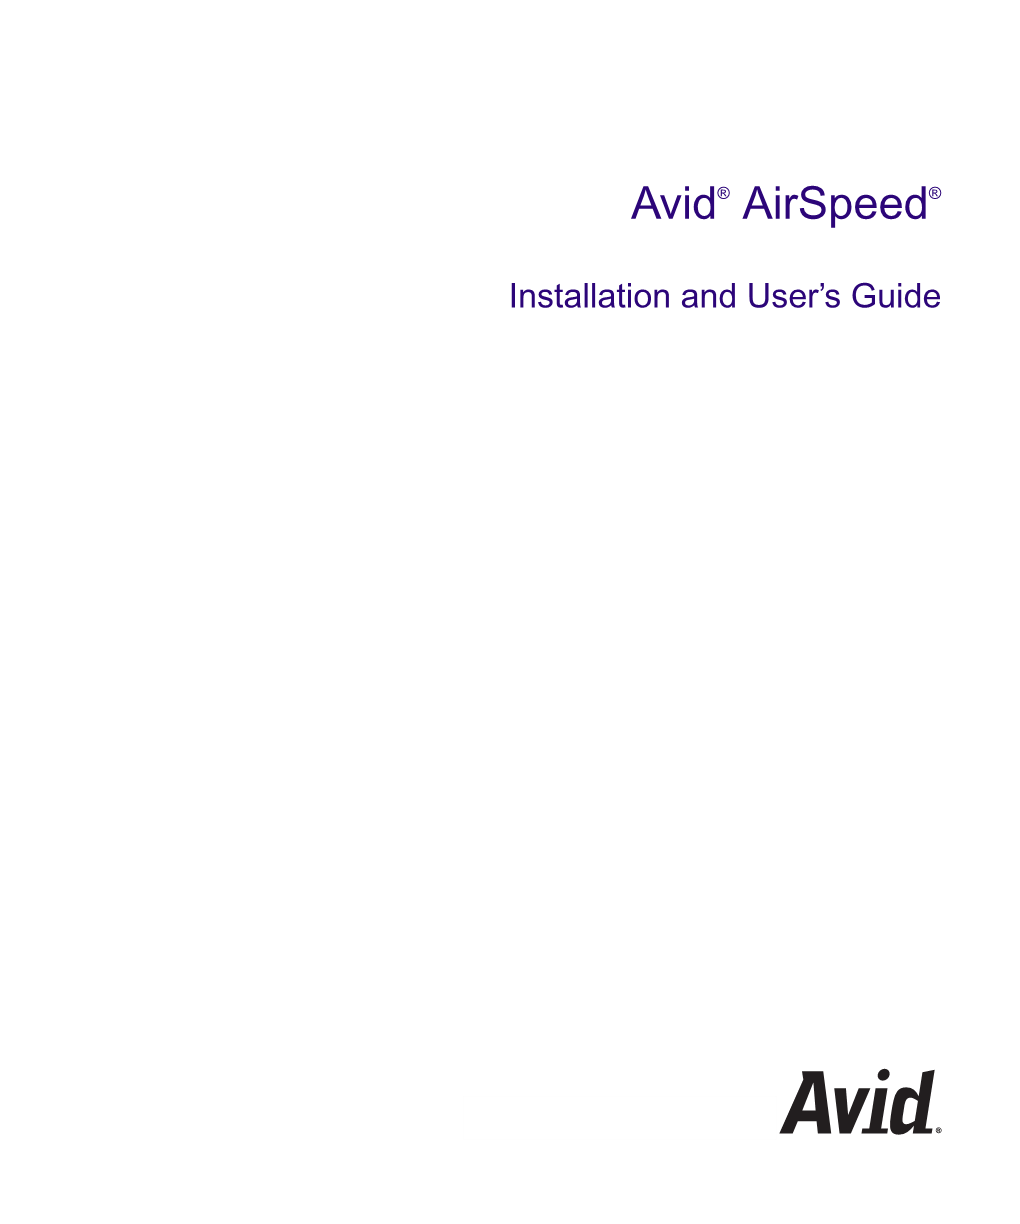 Avid Airspeed Installation and User's Guide